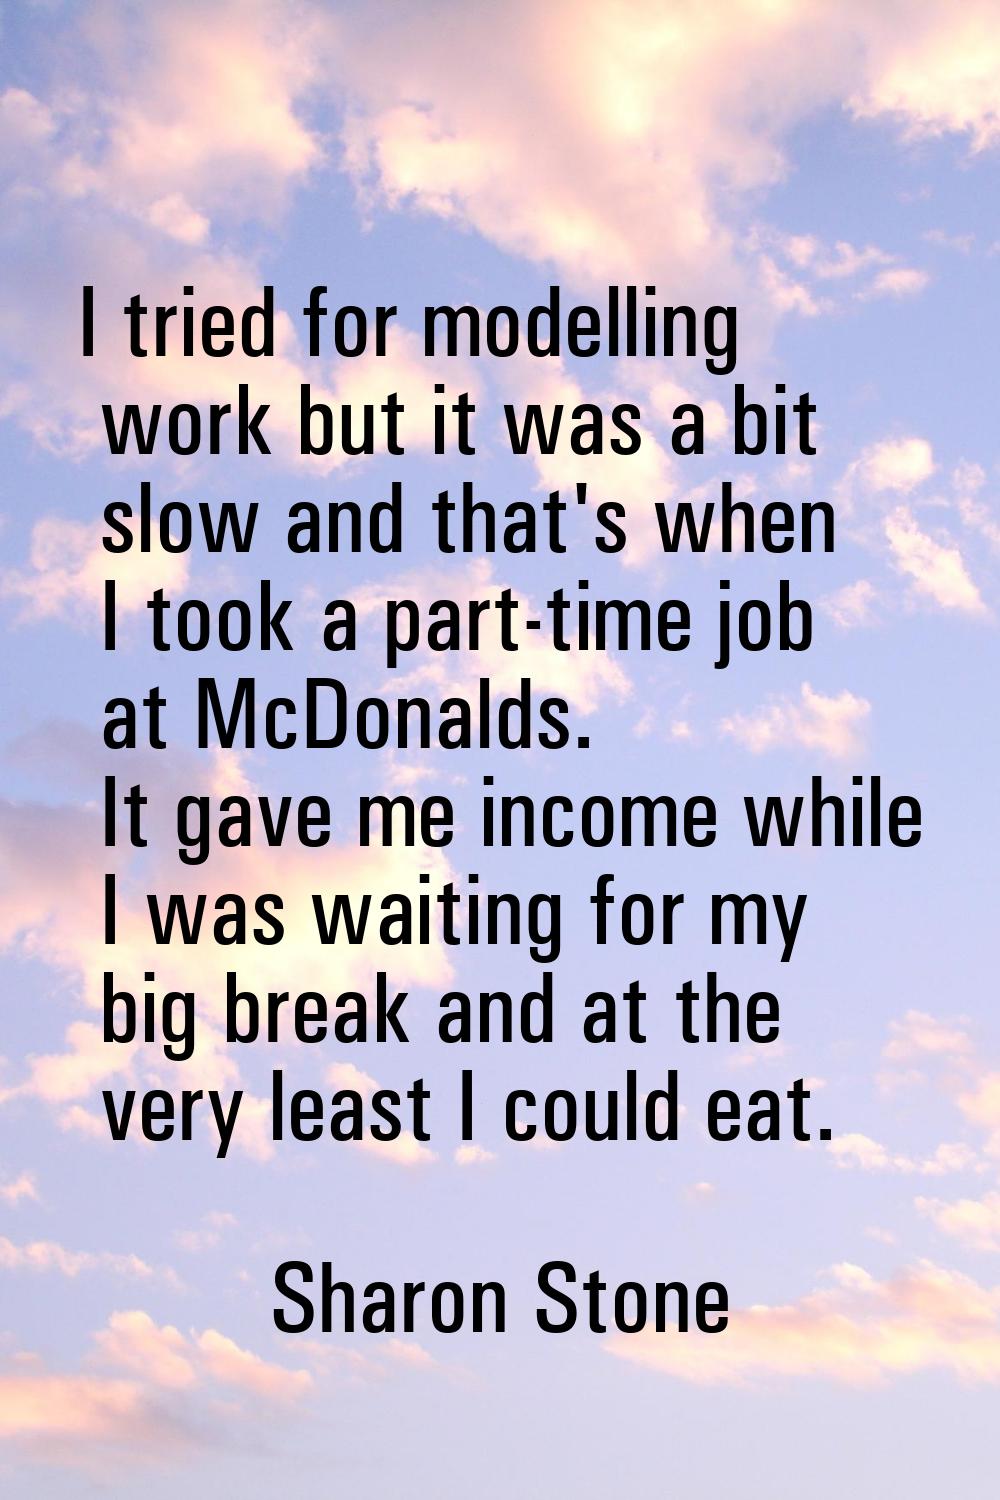 I tried for modelling work but it was a bit slow and that's when I took a part-time job at McDonald